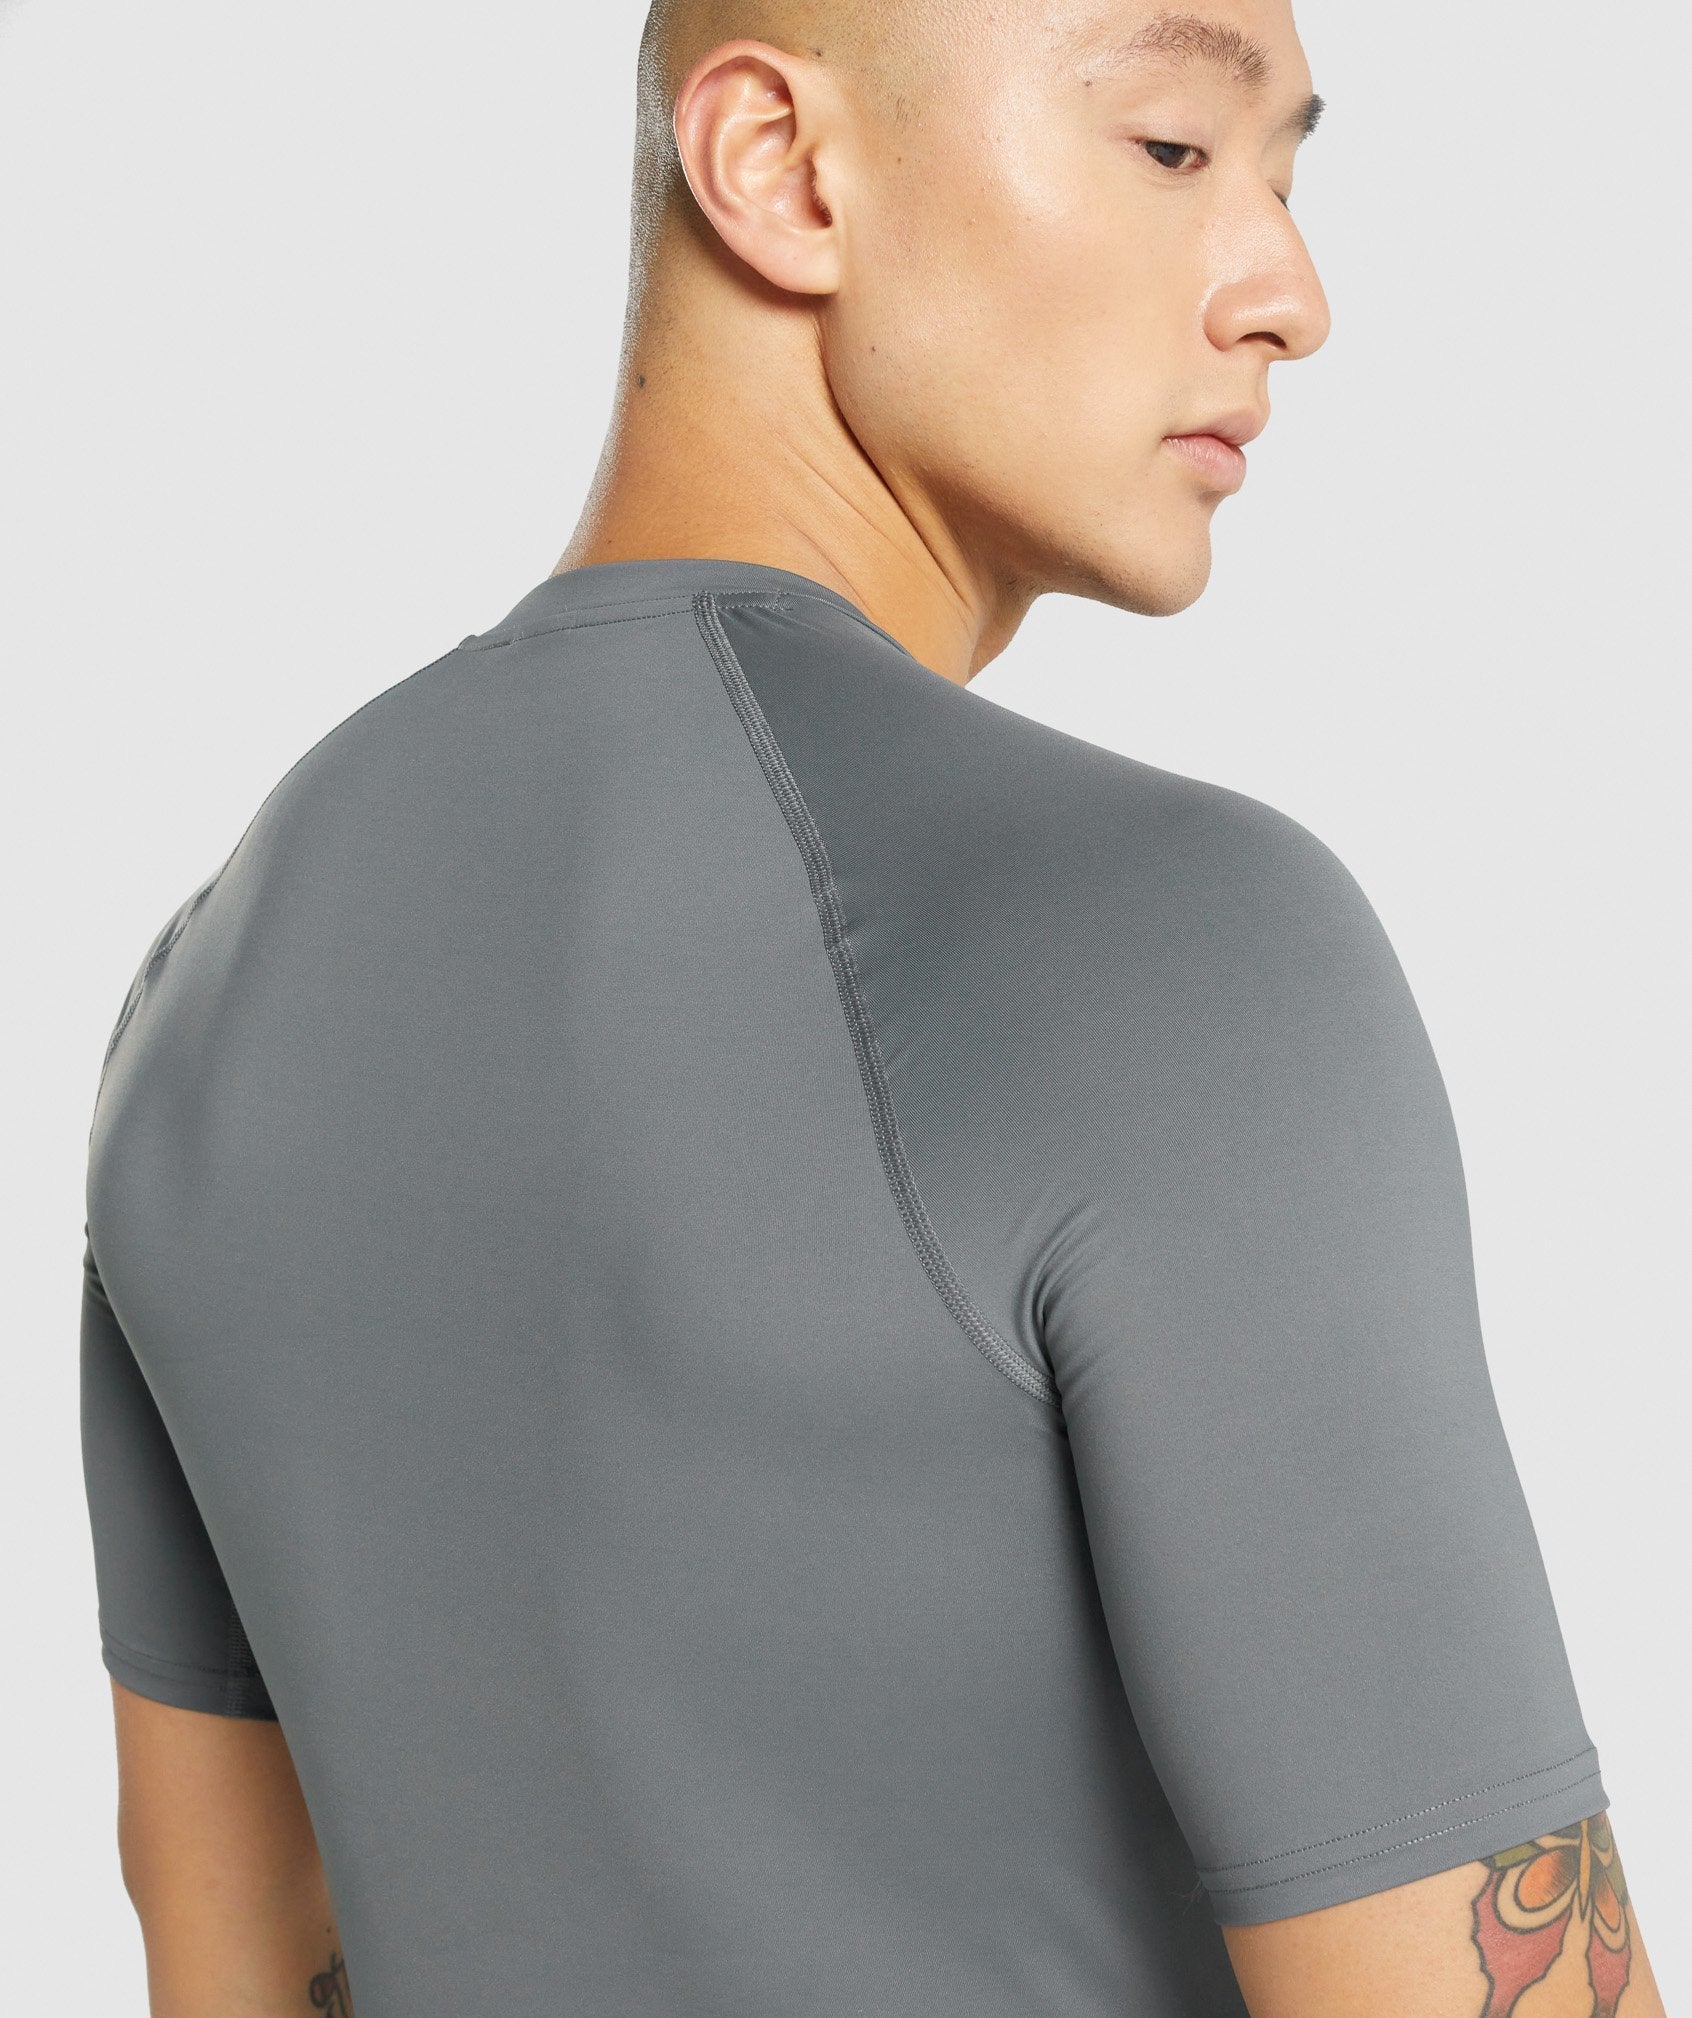 Element Baselayer T-Shirt in Charcoal - view 5